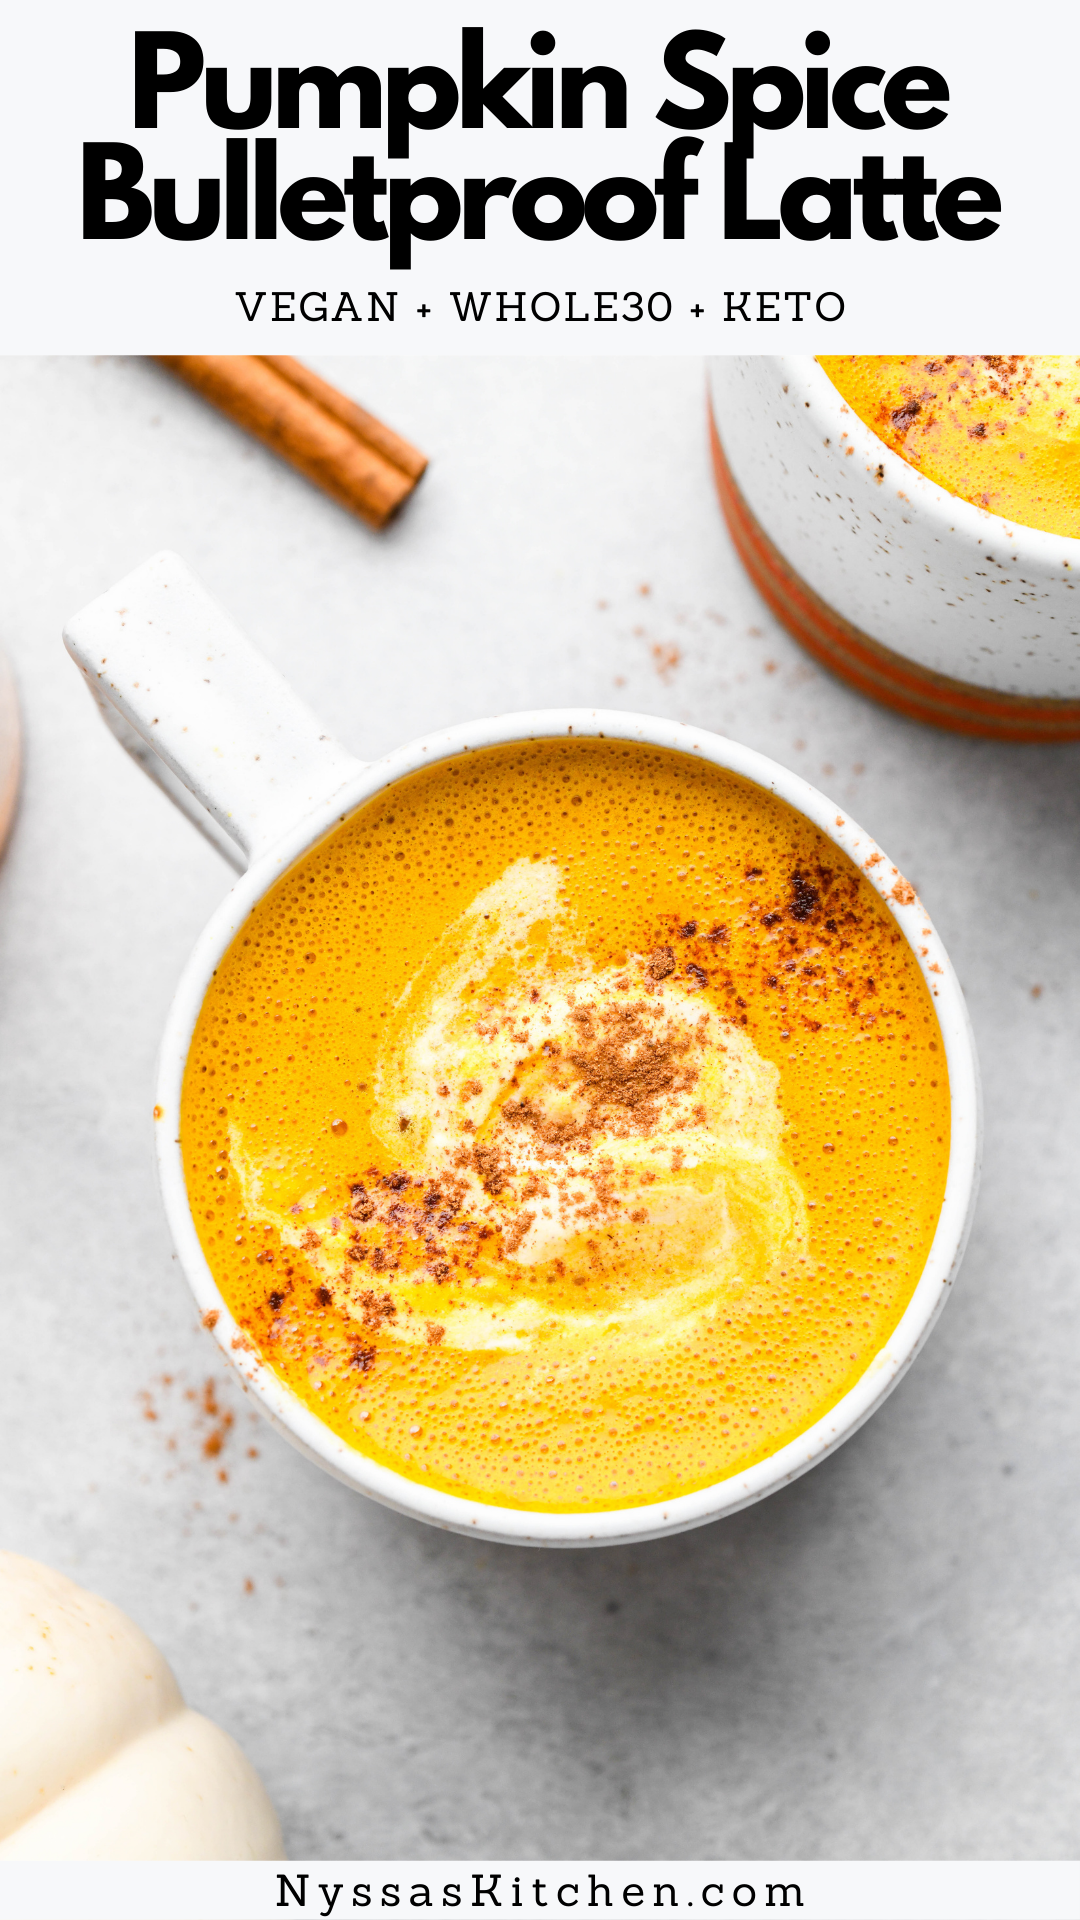 This pumpkin spice bulletproof latte is a delightful, healthy twist on a seasonal favorite! Made with all natural ingredients that are dairy free and refined sugar free. Easy to make and full of perfectly spiced pumpkin-y flavor! Option to make without pumpkin puree. Vegan, paleo Whole30 option, keto option.